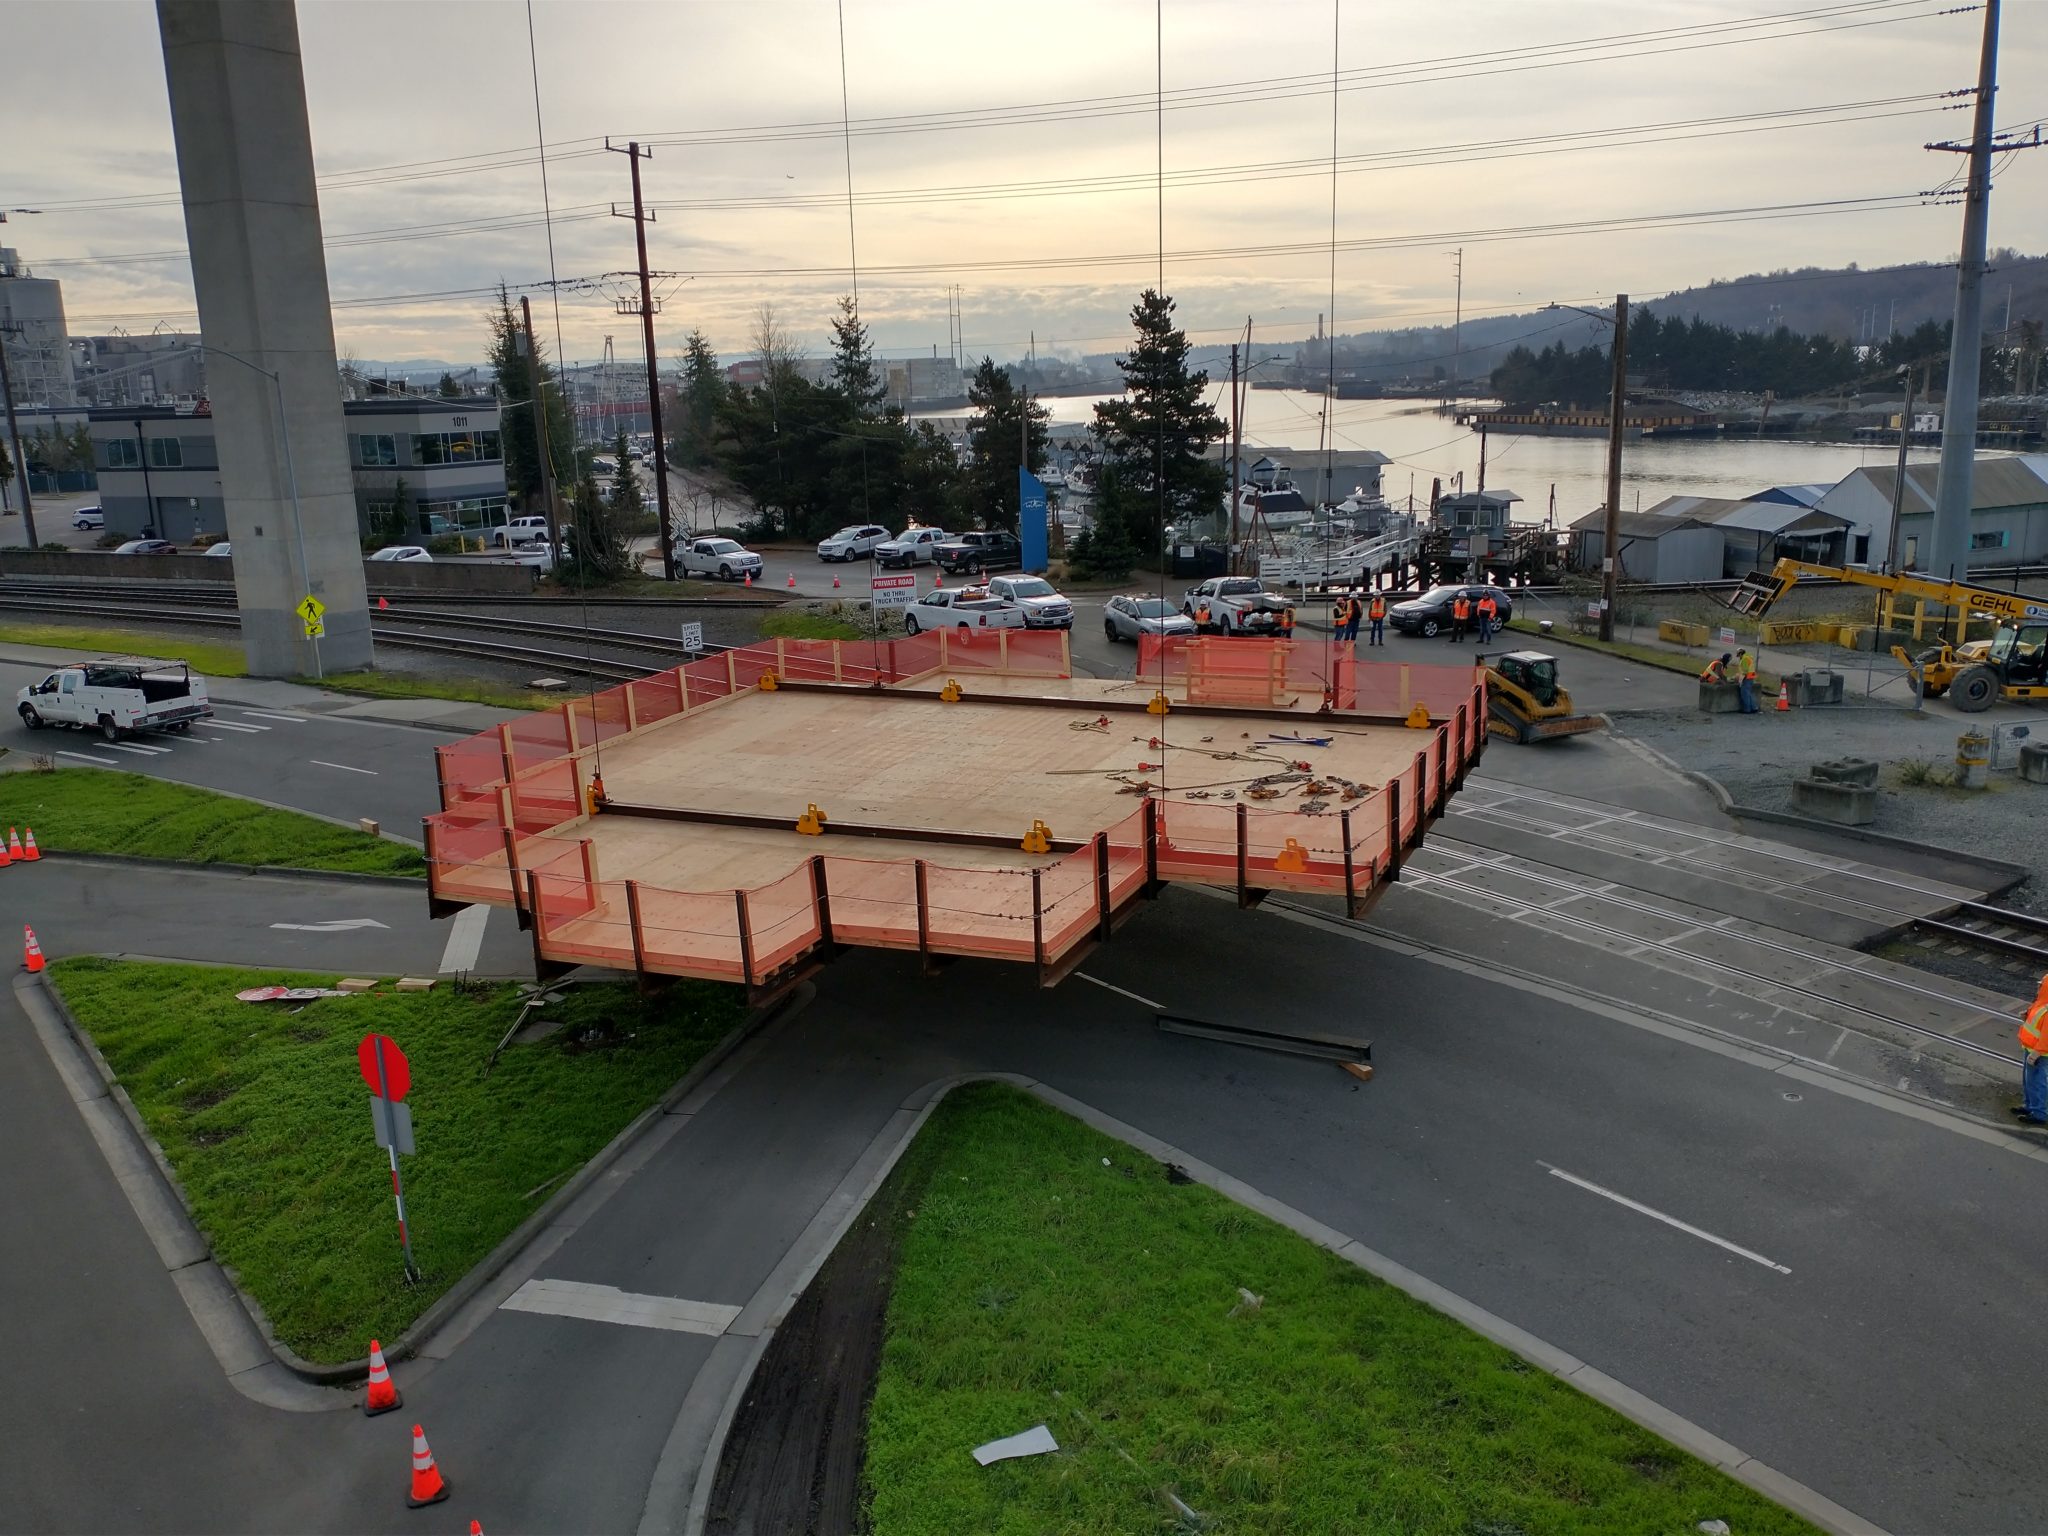 The work platform begins to lift off. Grass, roadway, tracks, and the Duwamish Waterway are visible in the background.